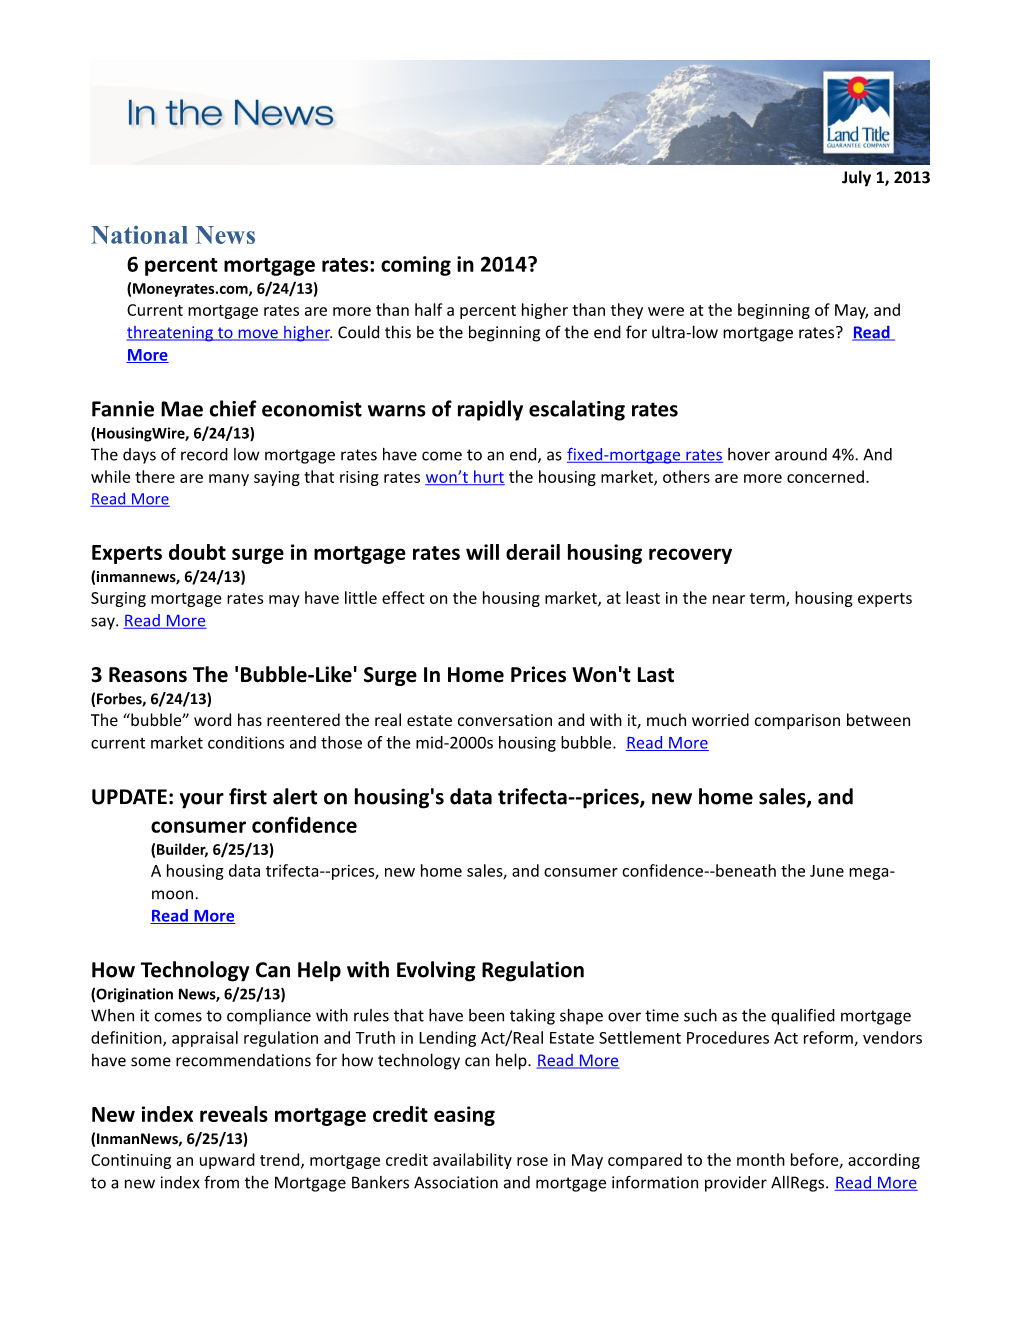 National News6 Percent Mortgage Rates: Coming in 2014?(Moneyrates.Com, 6/24/13)Current